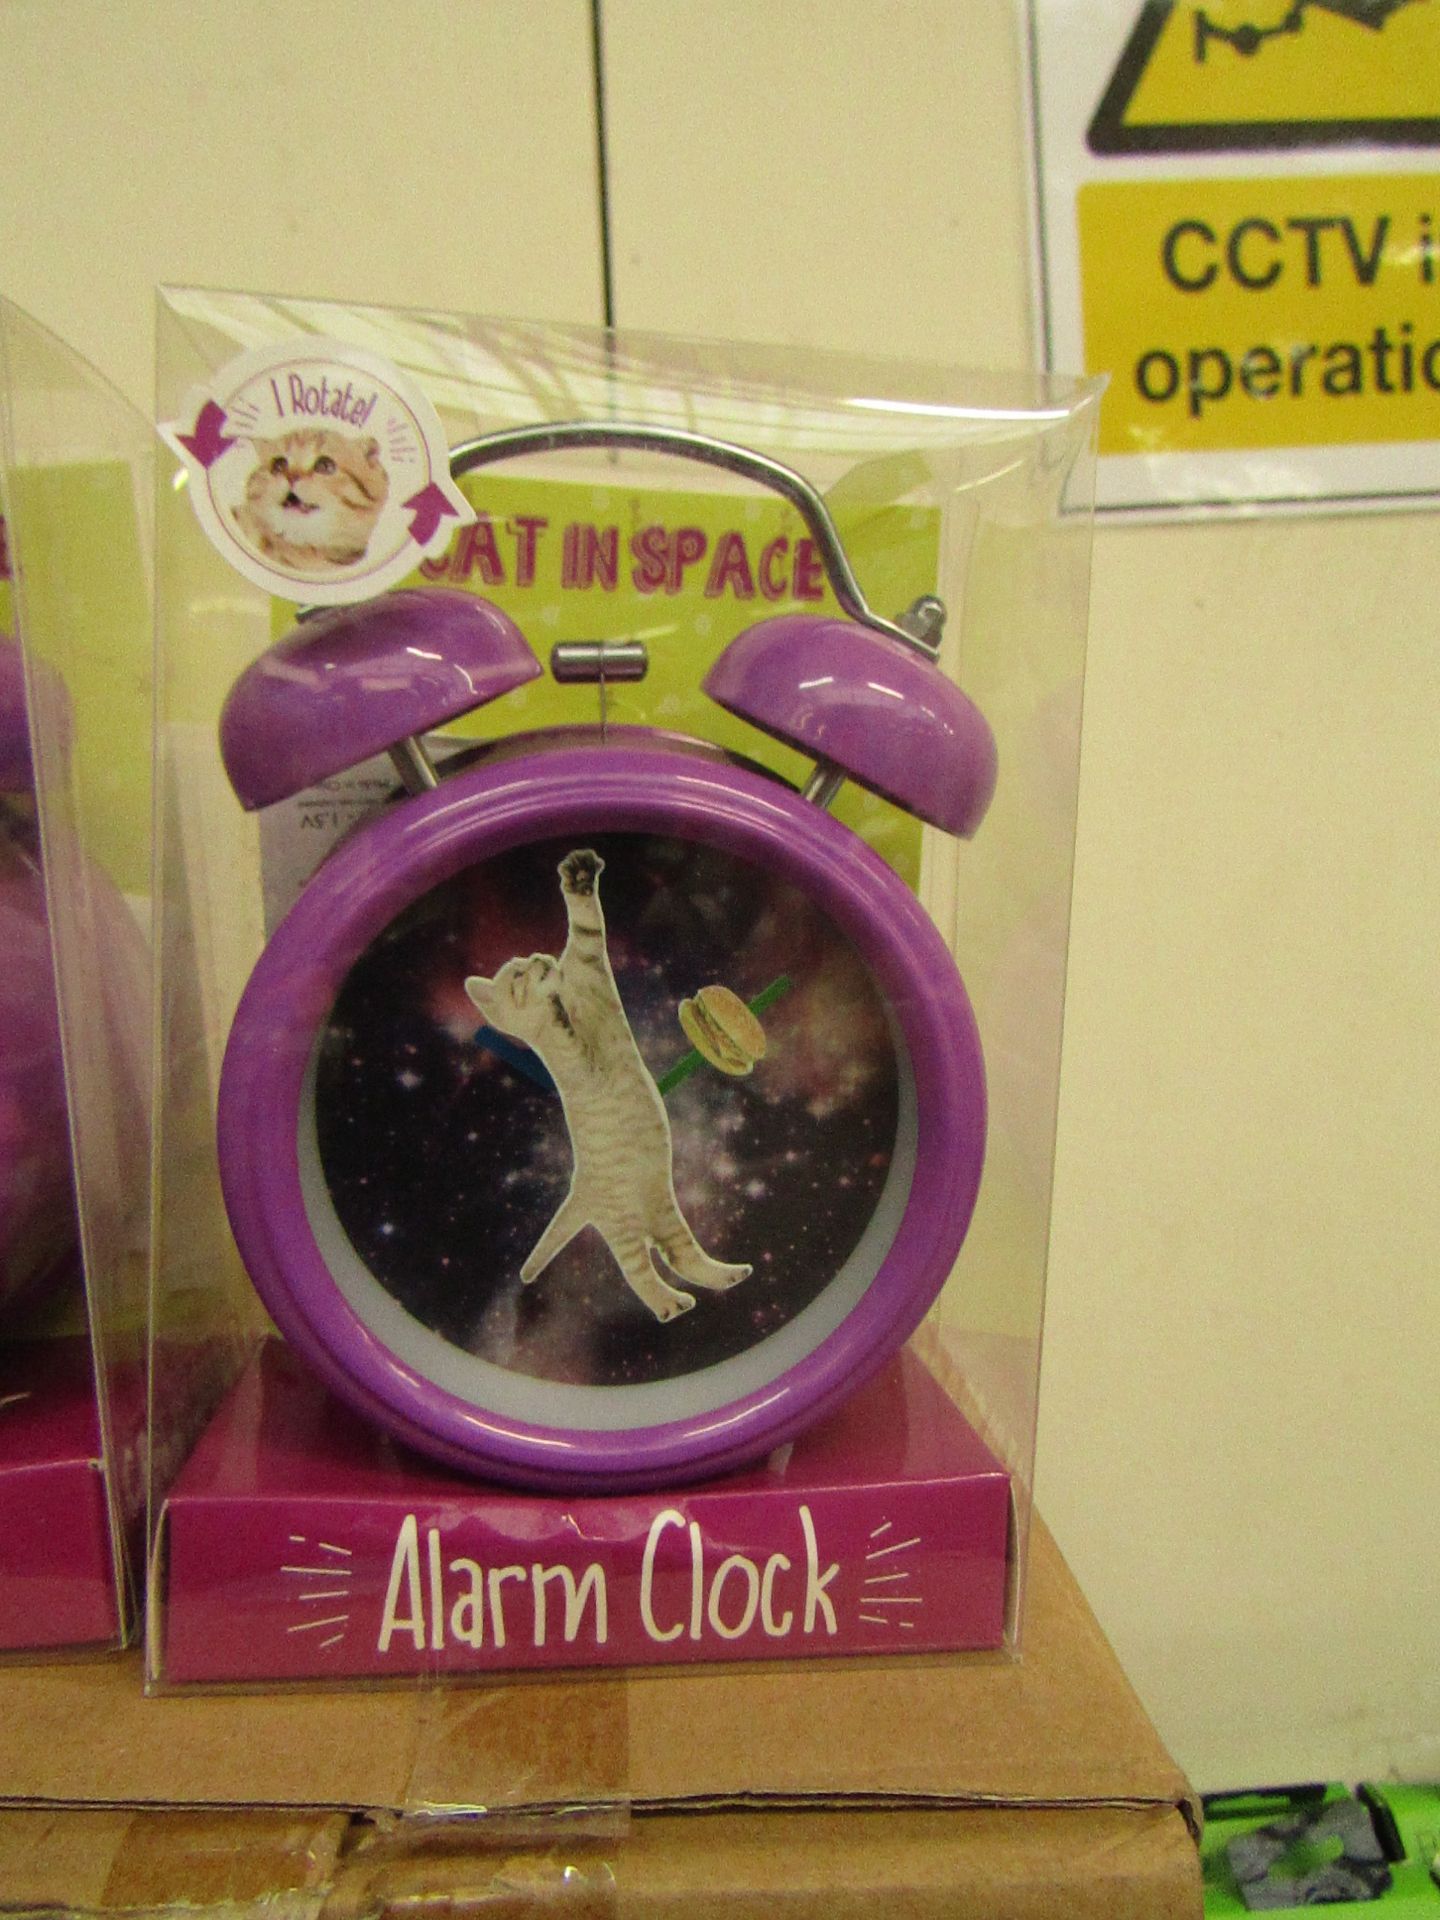 1 box of Cats in Space - Alarm clocks, (purple) 12 clocks per box, all packaged and boxed.